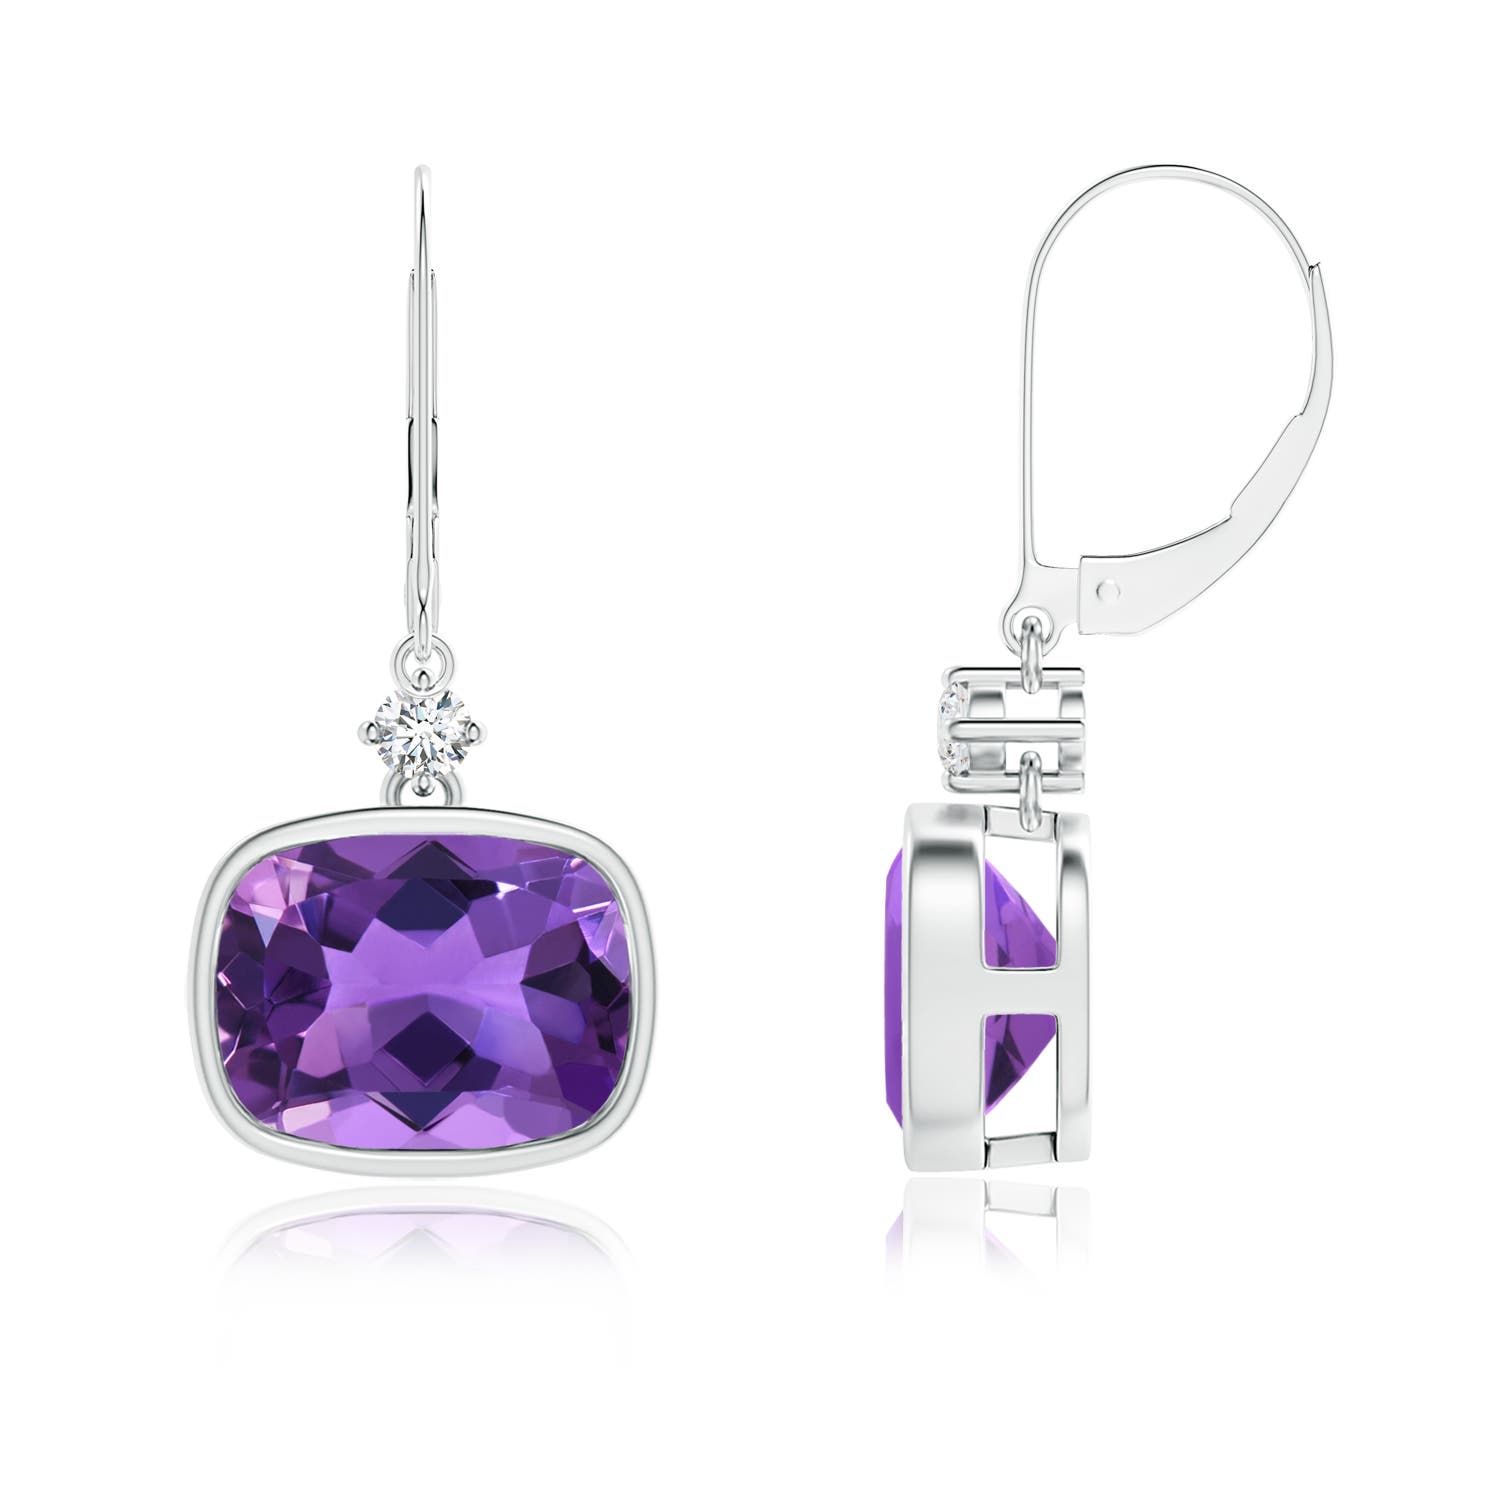 AAA - Amethyst / 4.07 CT / 14 KT White Gold